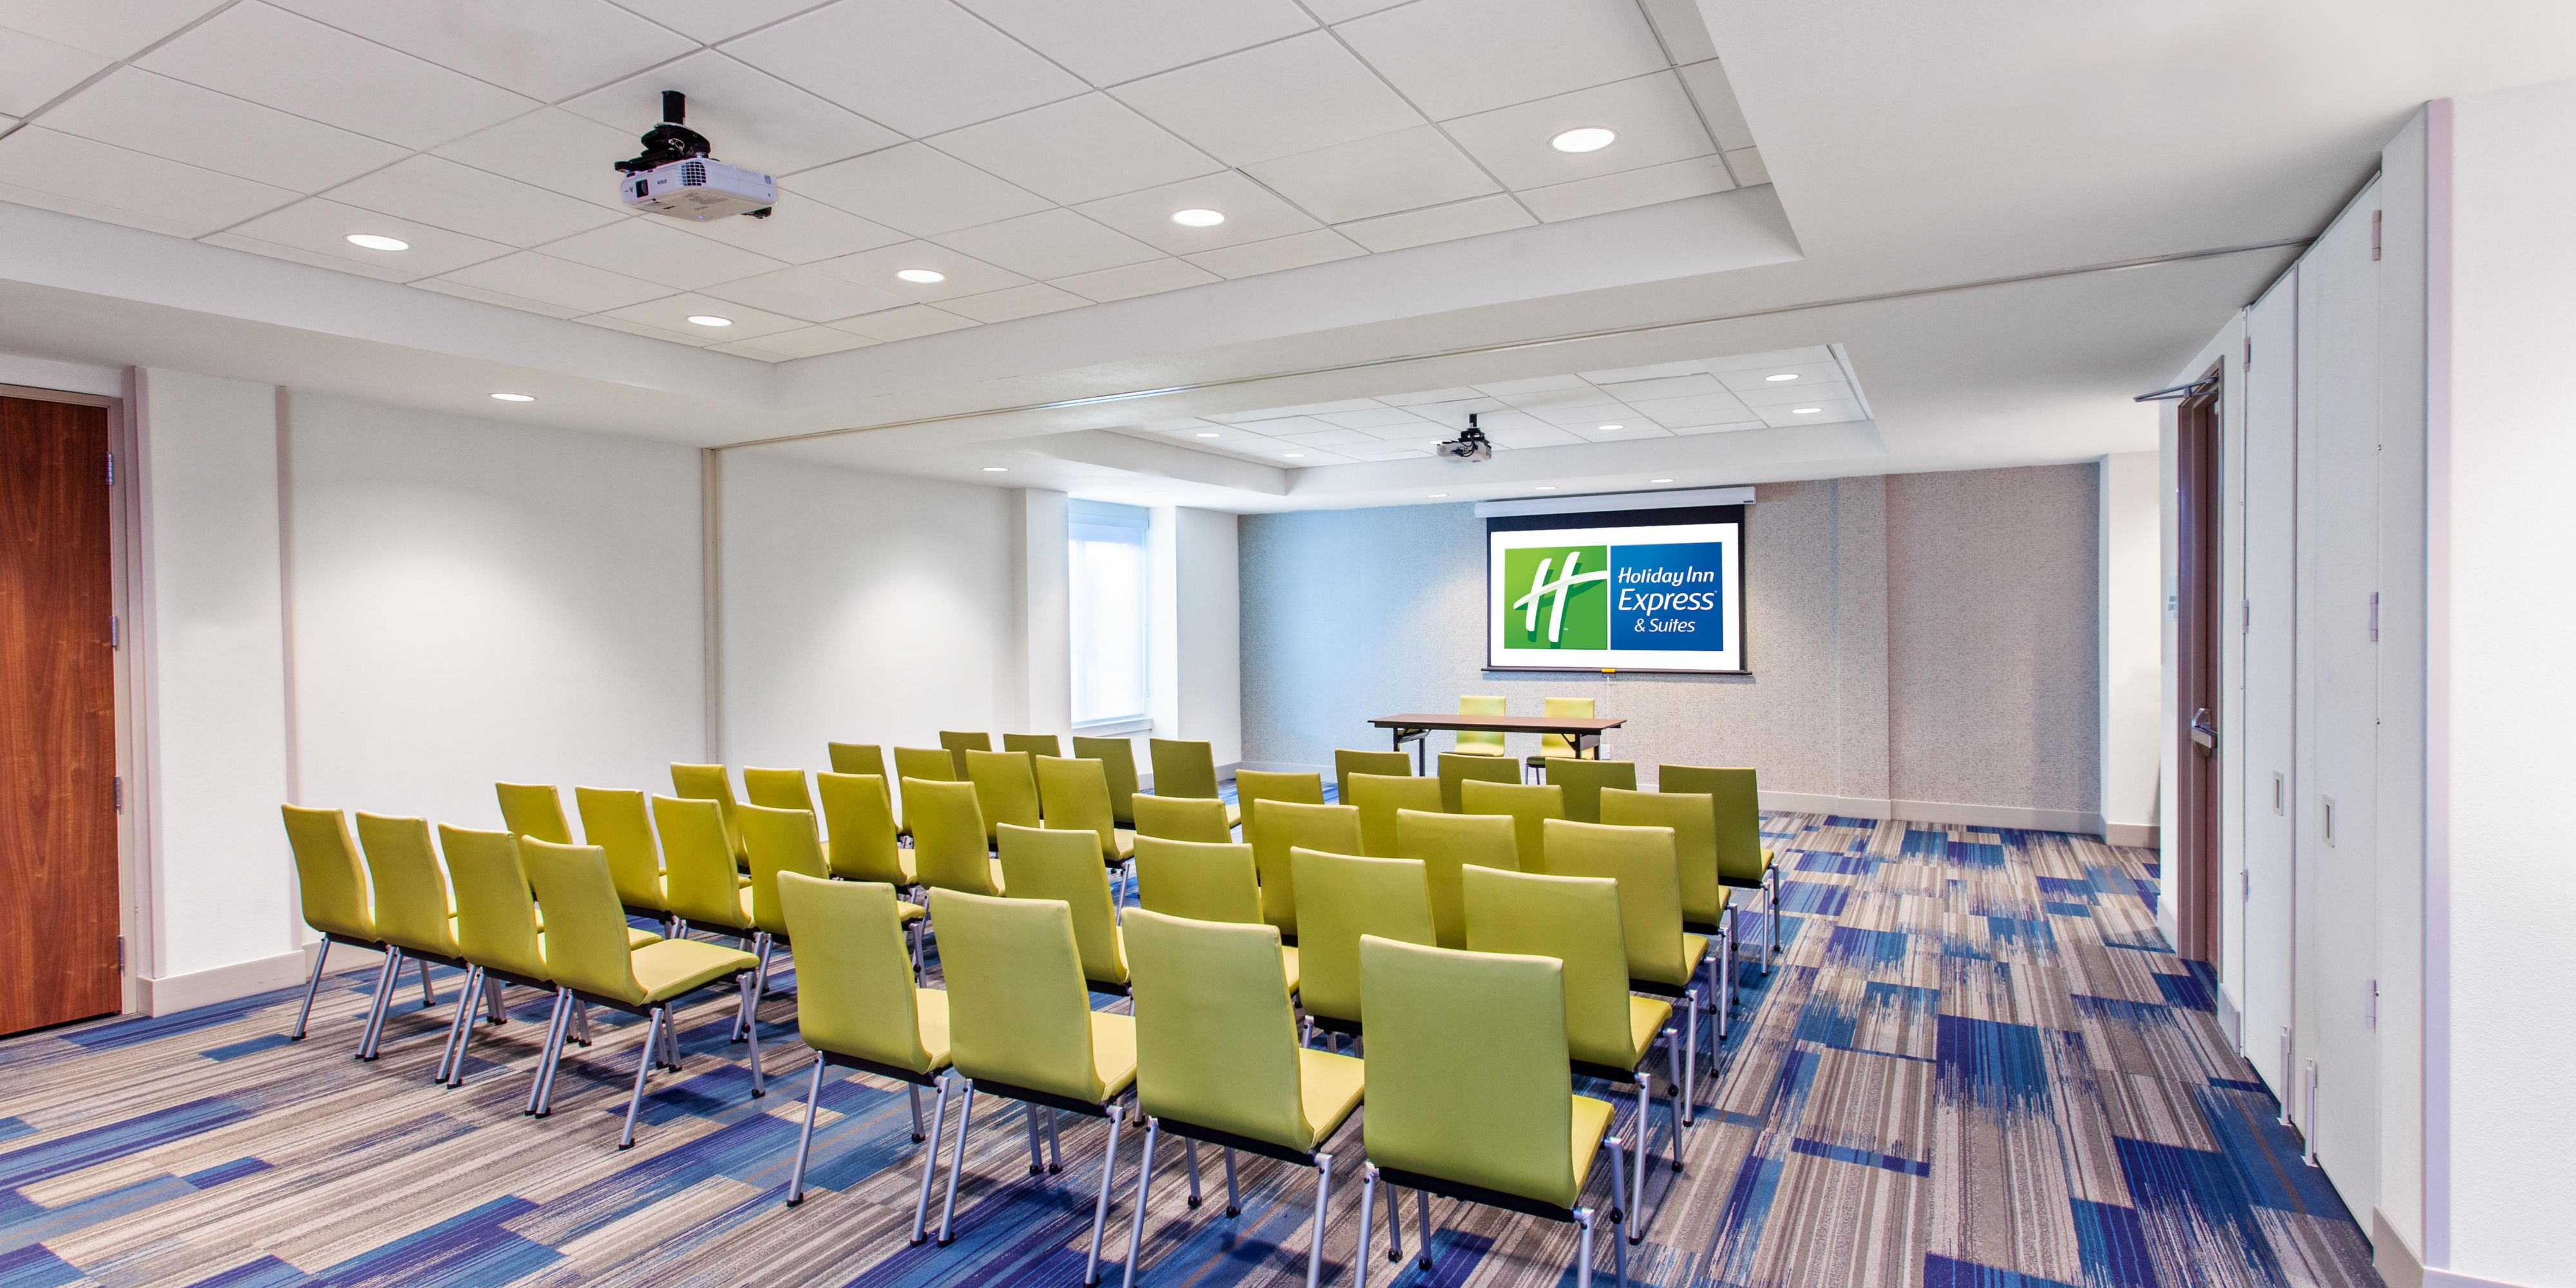 If you need to host an event, our large dividable meeting room is ideal and can hold up to 48 people!